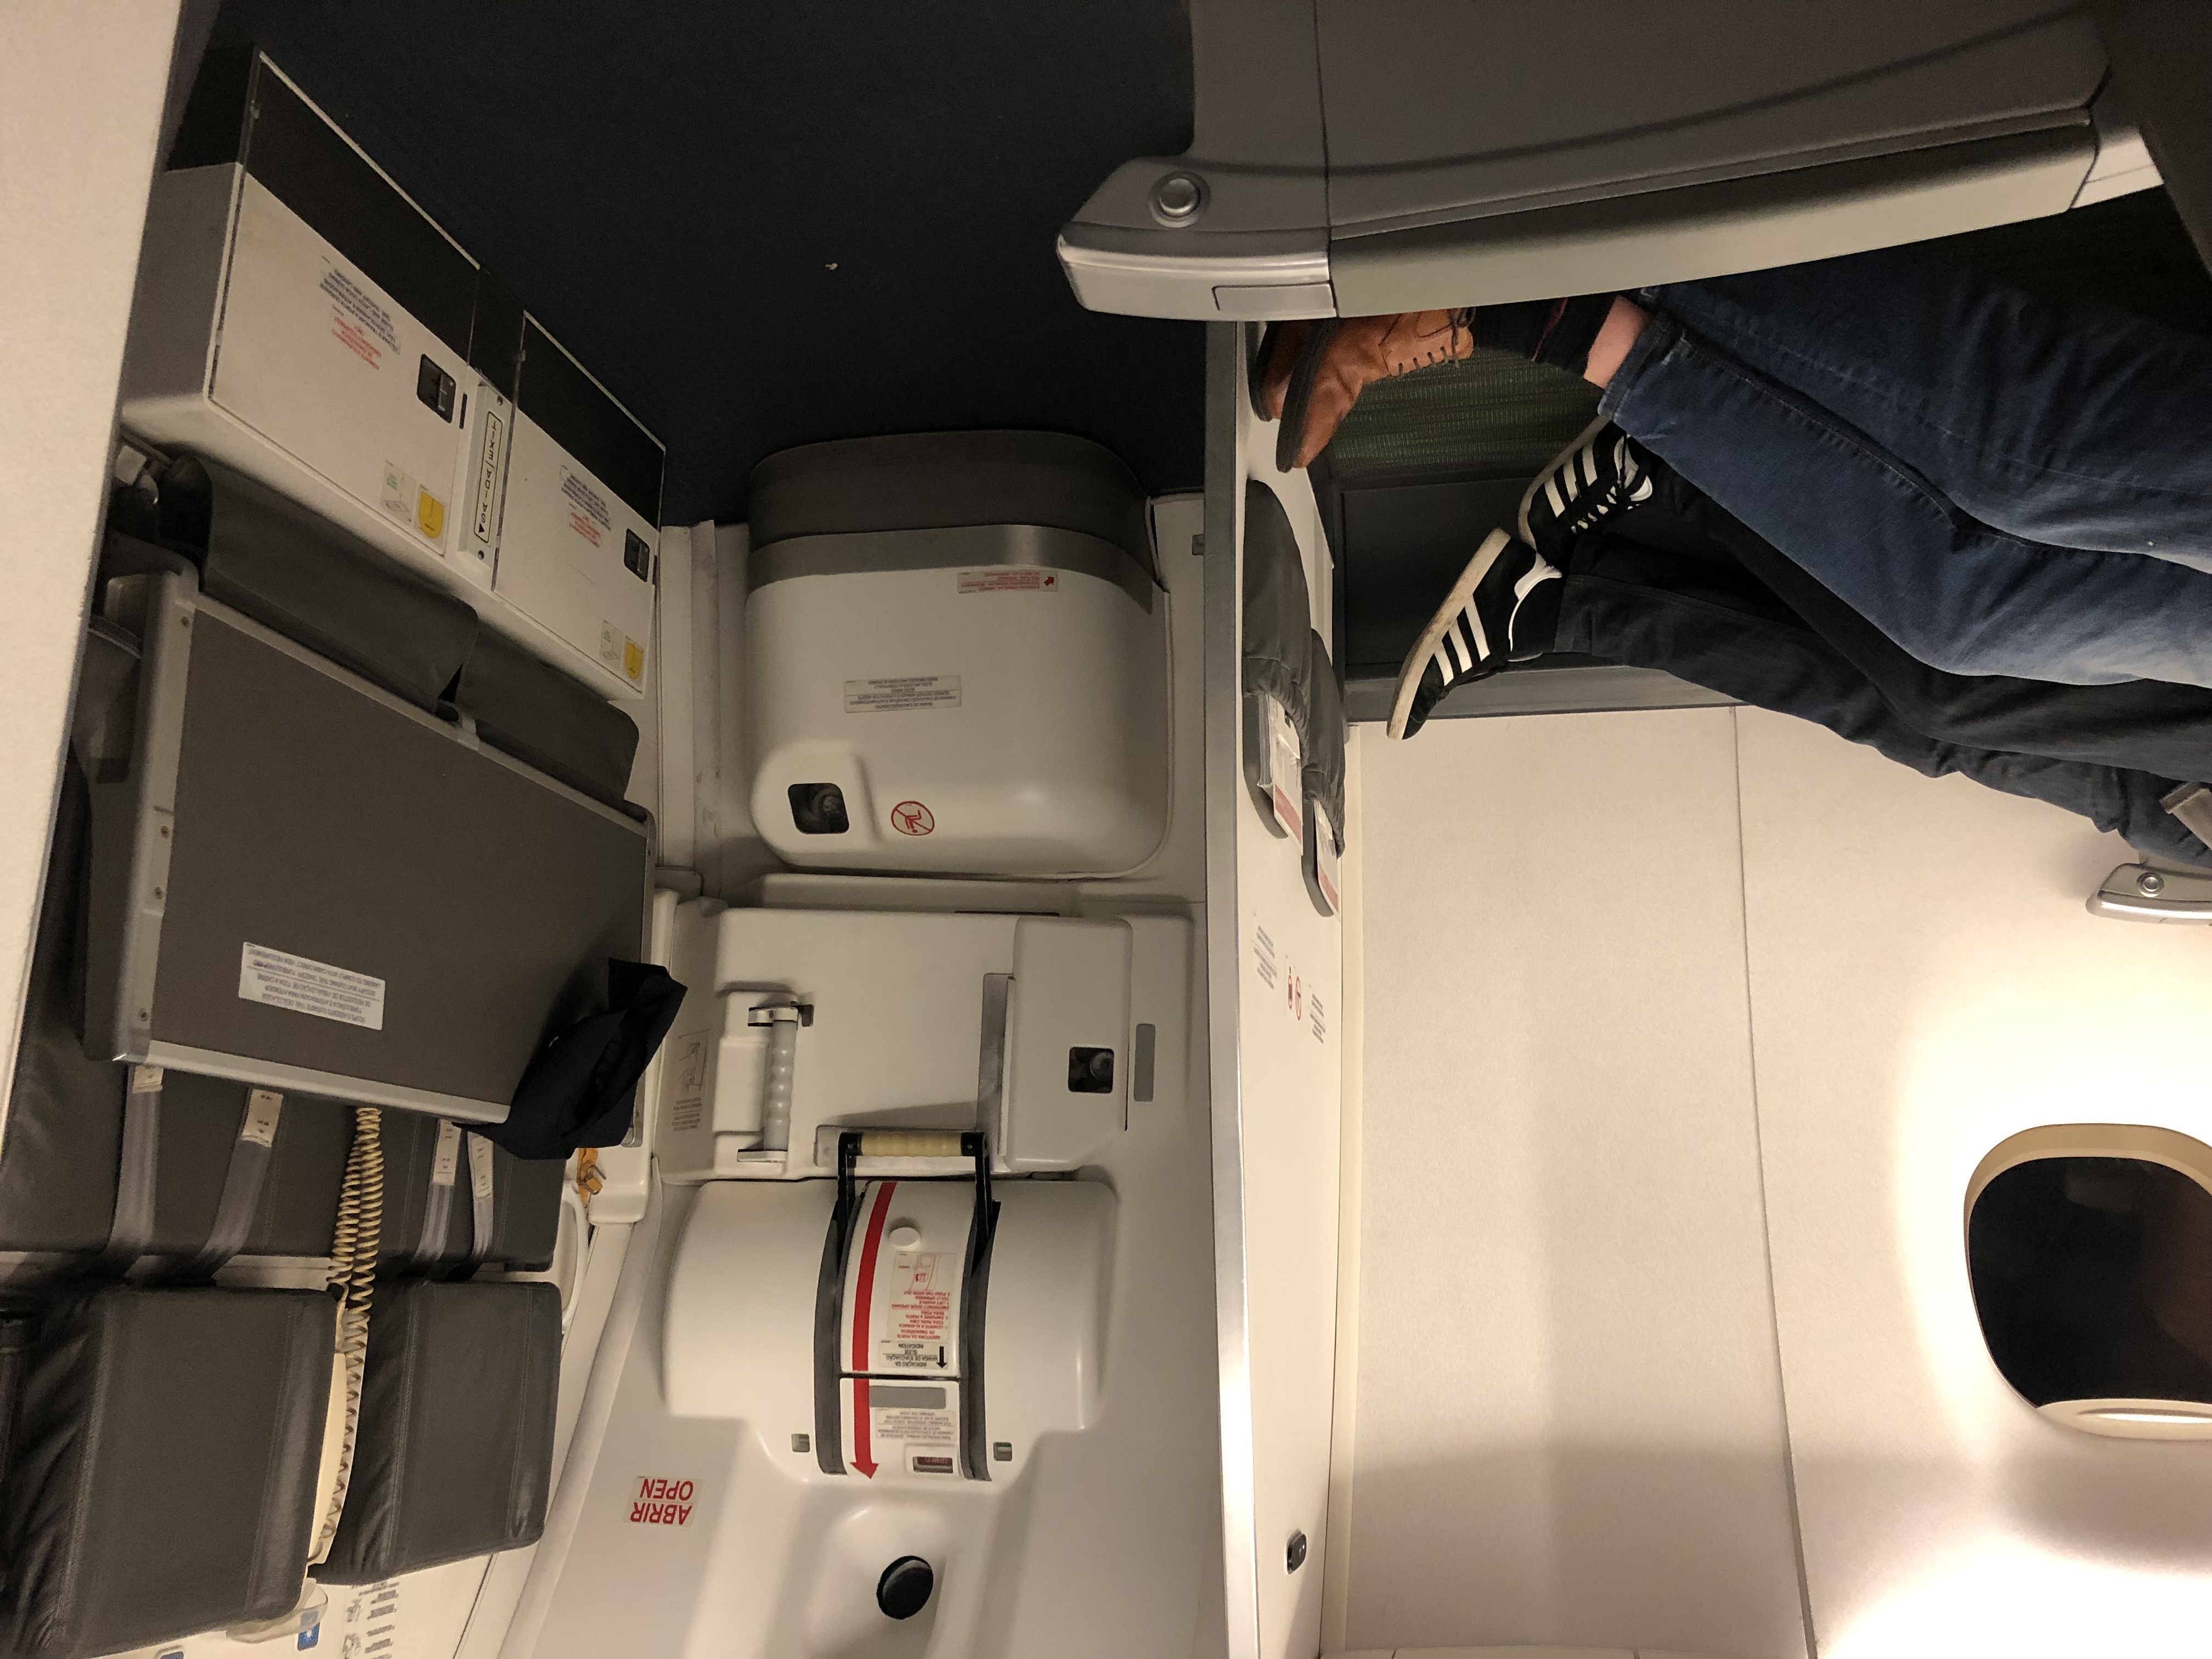 a person's legs in a seat on an airplane